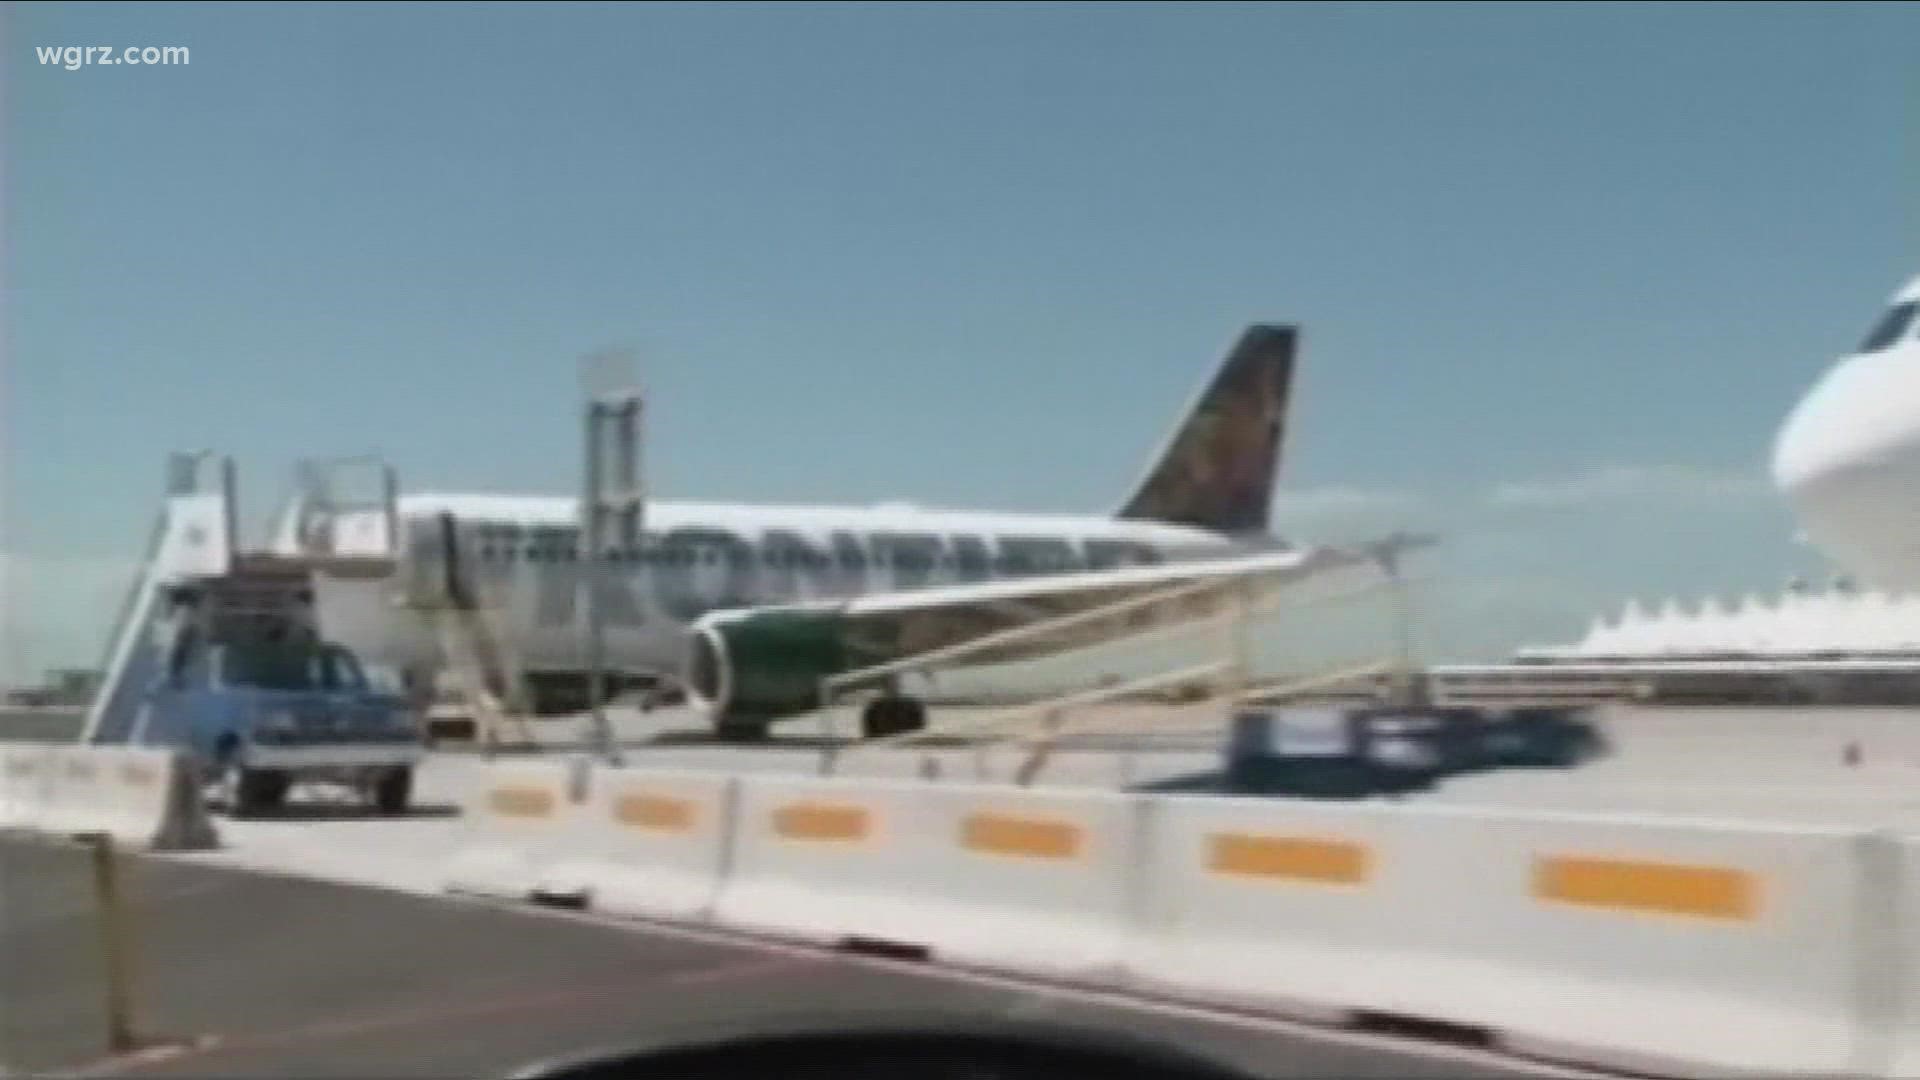 Frontier Airlines Planning To Add More Flights To New Cities From Buffalo